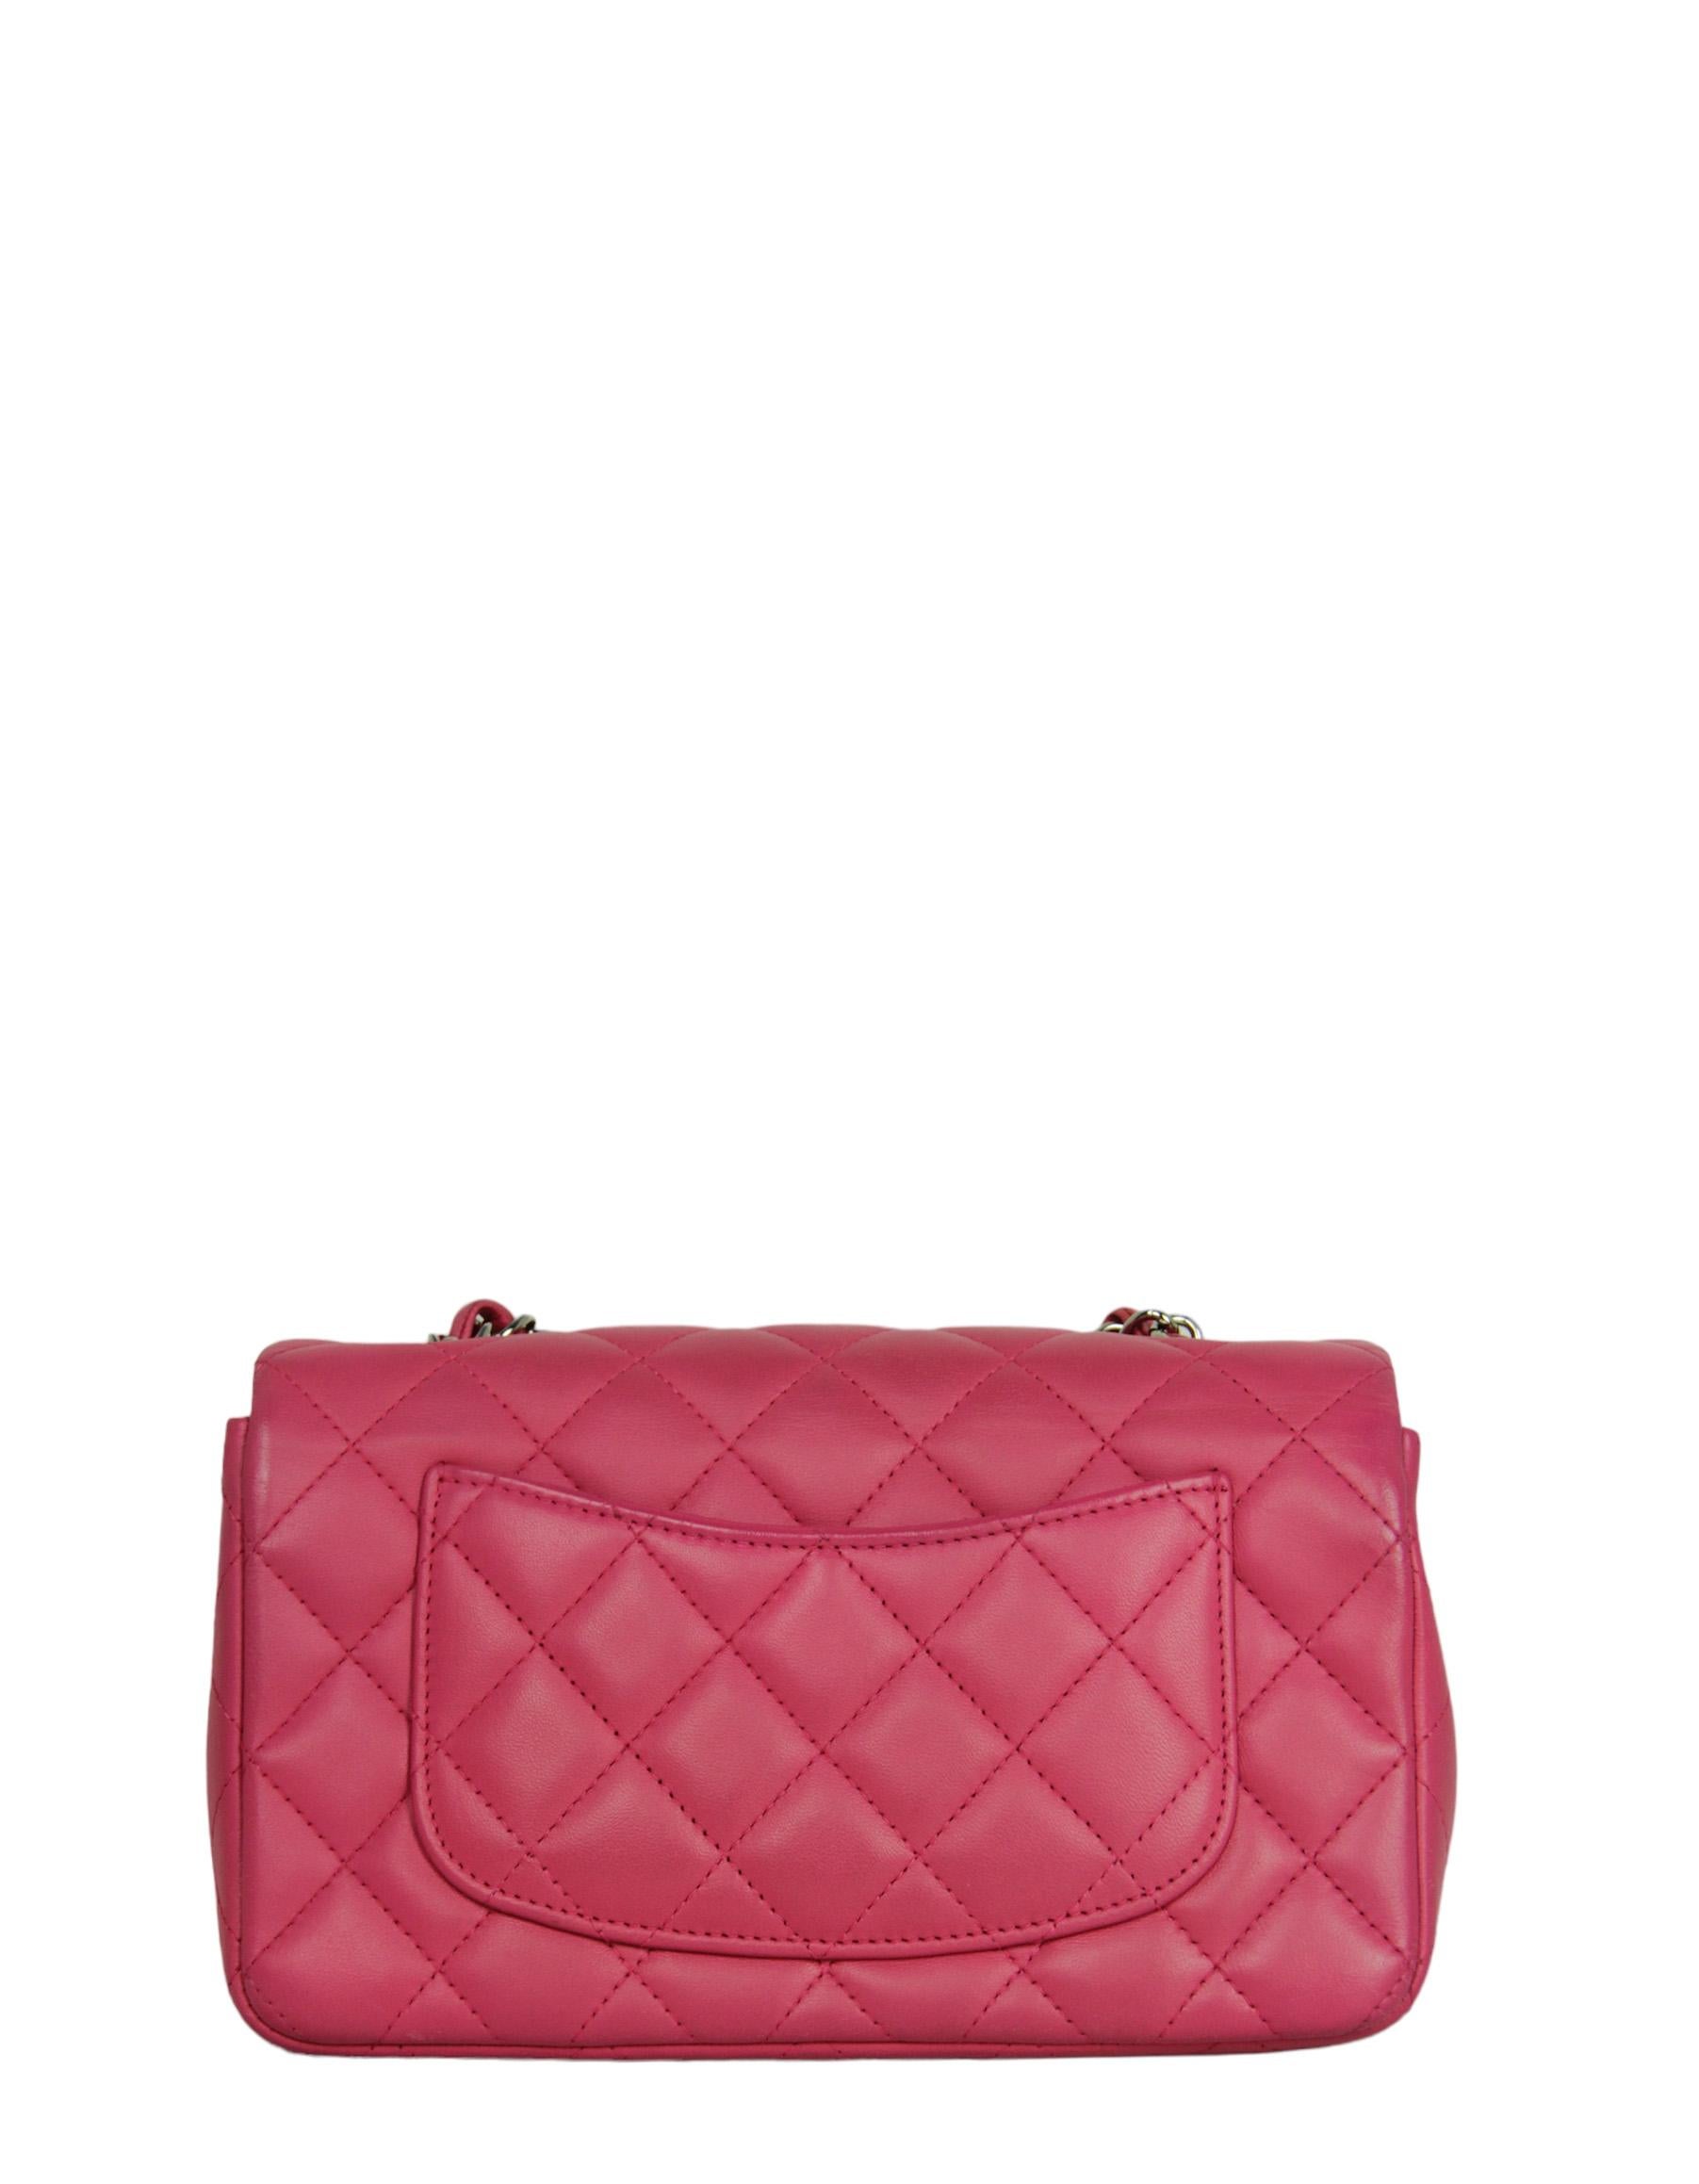 Chanel Pink Lambskin Leather Quilted Rectangular Mini Flap Bag In Good Condition For Sale In New York, NY